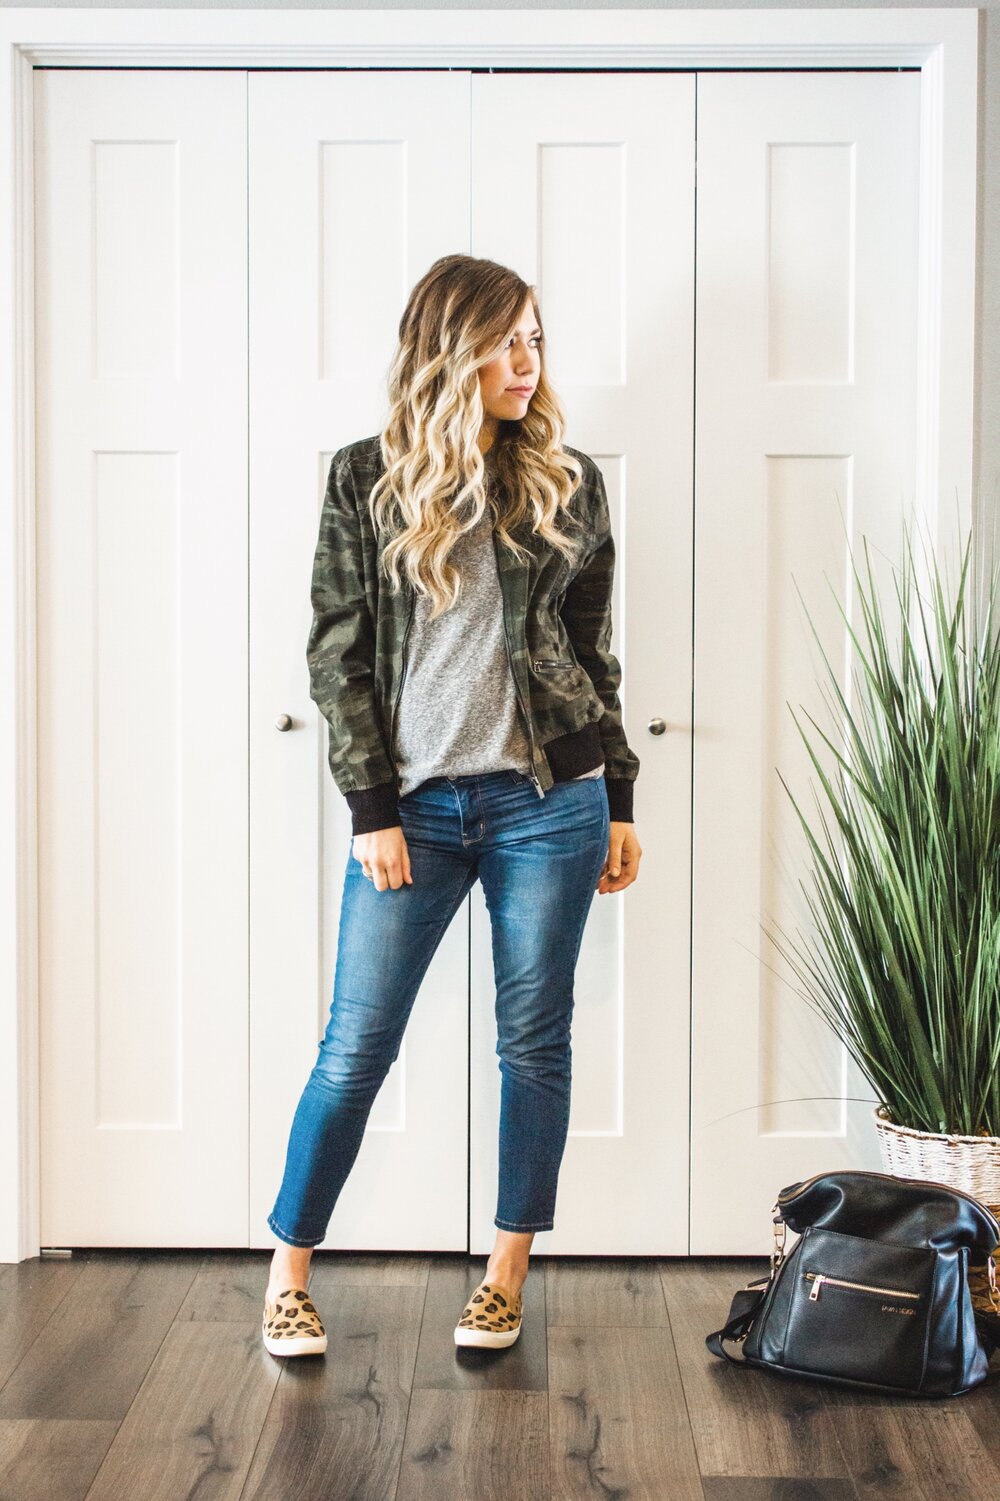 How to Find the Perfect Pair of Jeans — Adrianna Bohrer